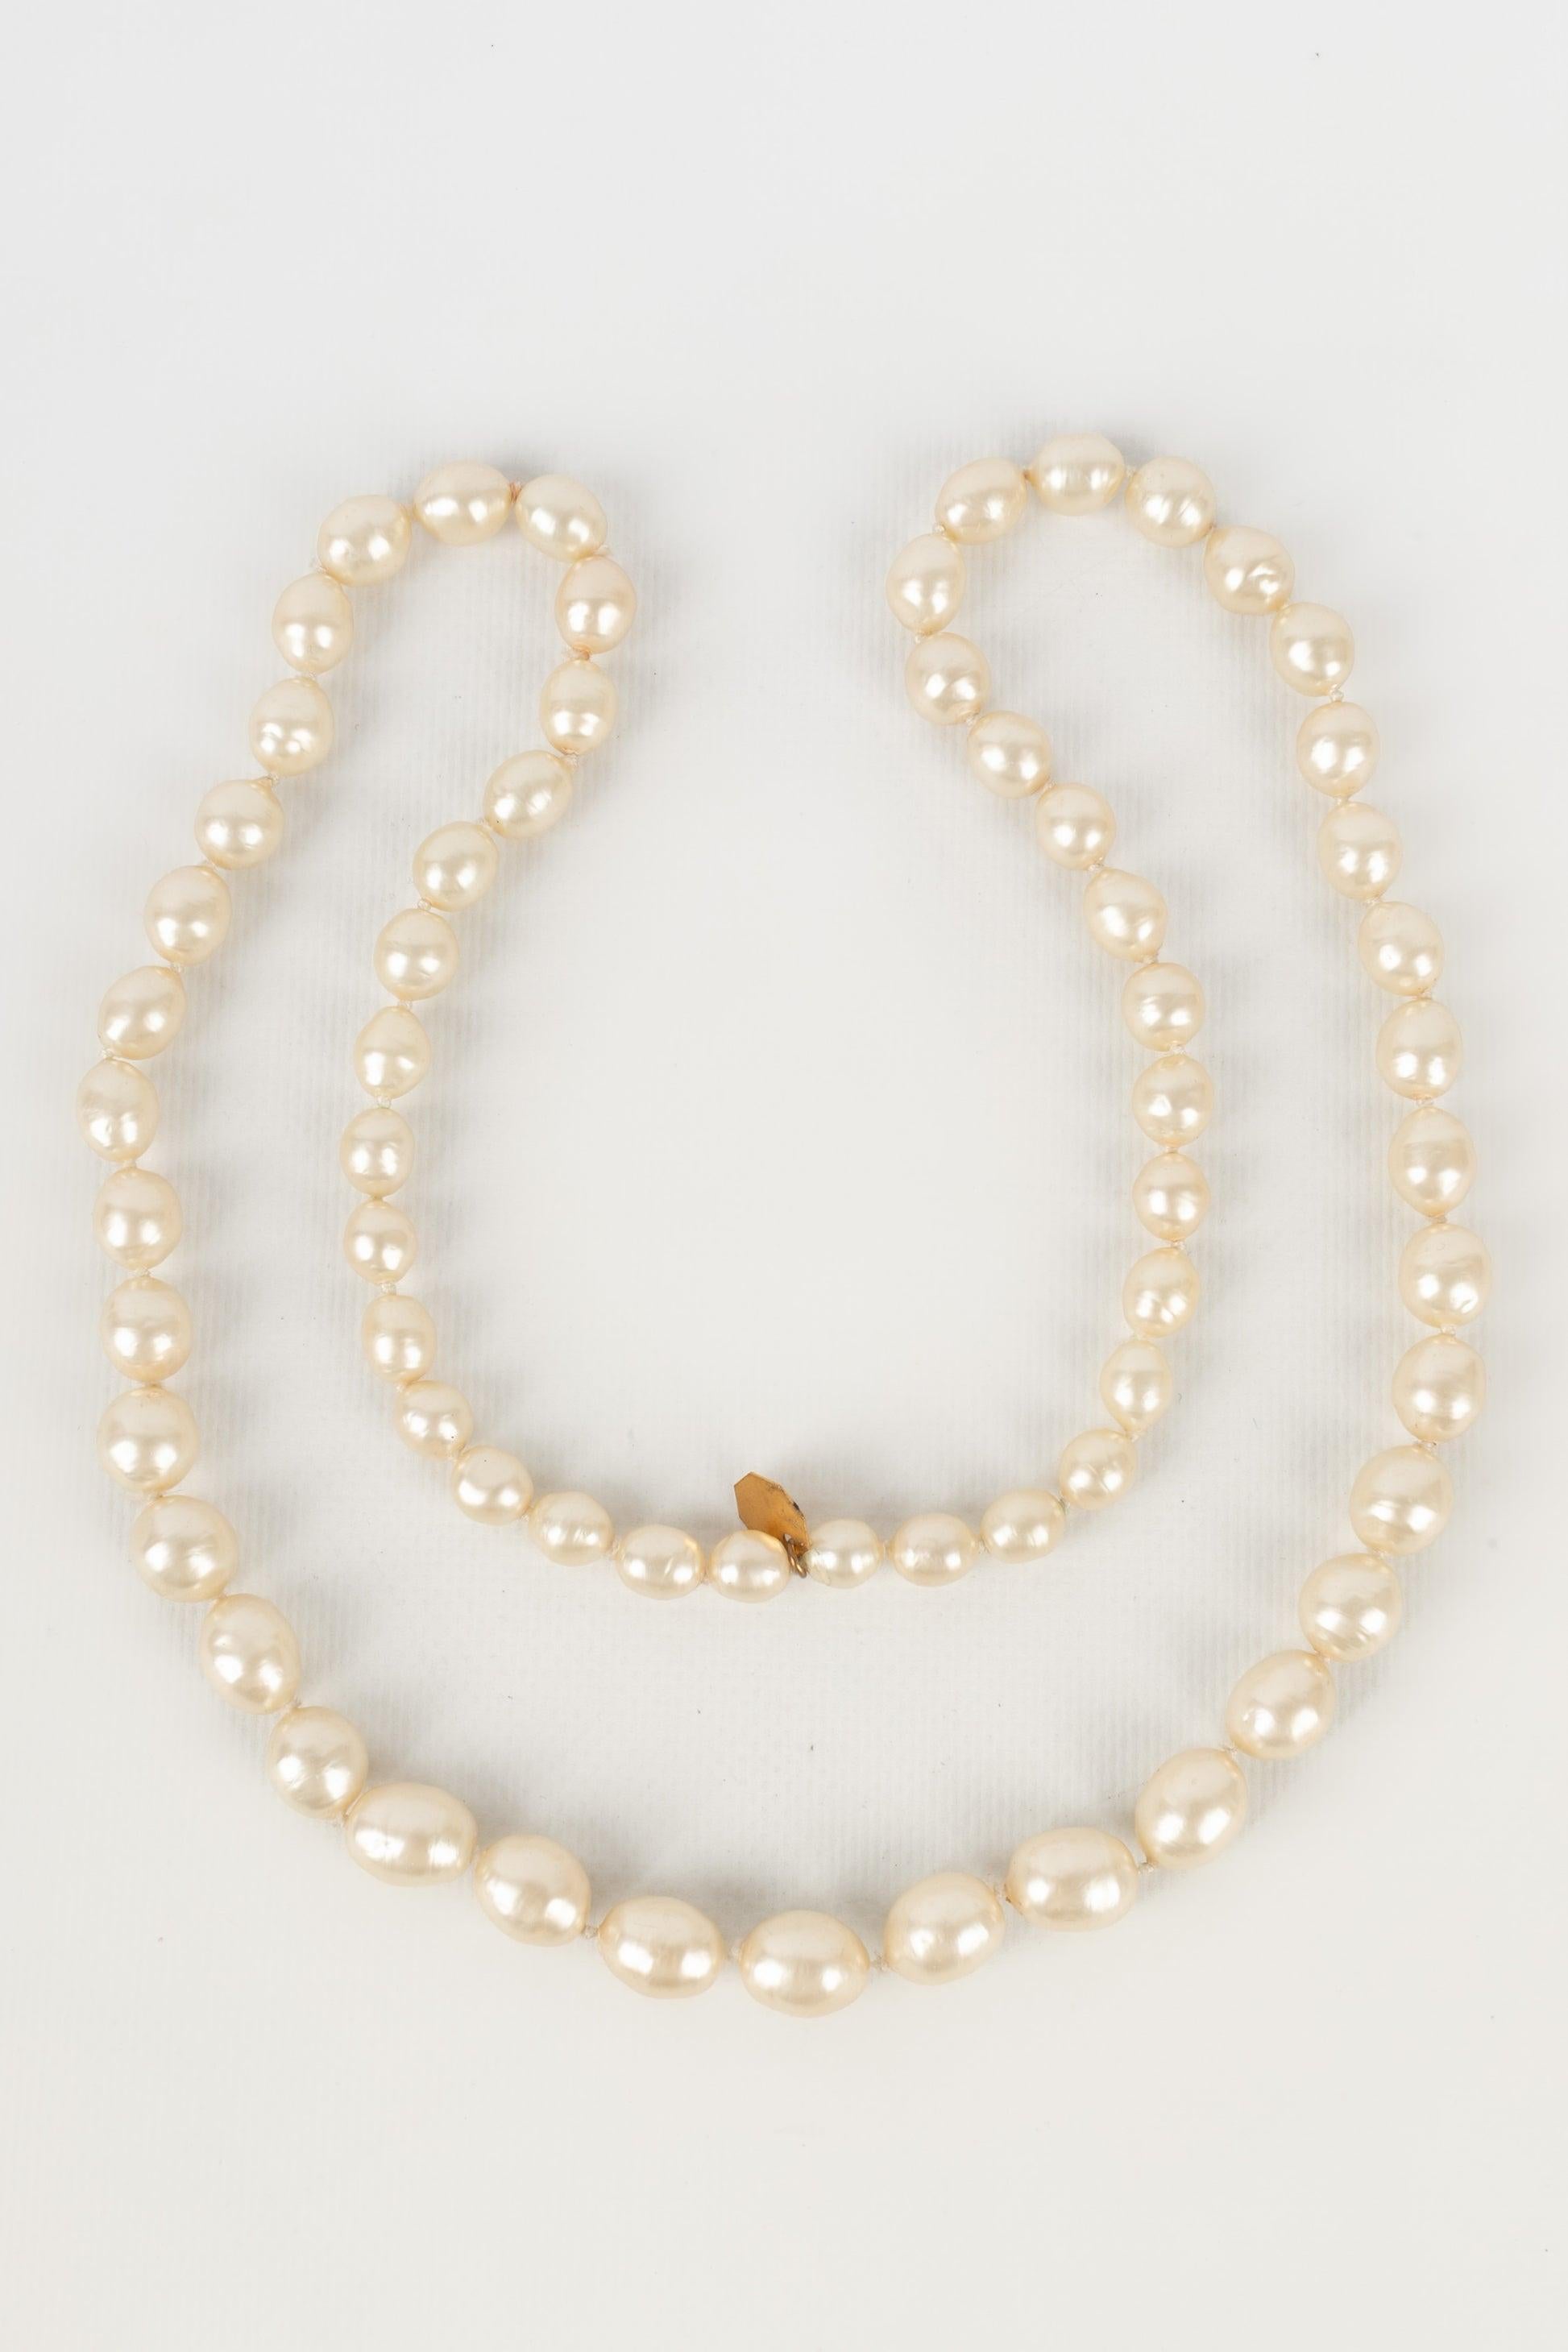 Chanel Costume Pearl Necklace with a Golden Metal Pendant For Sale 5